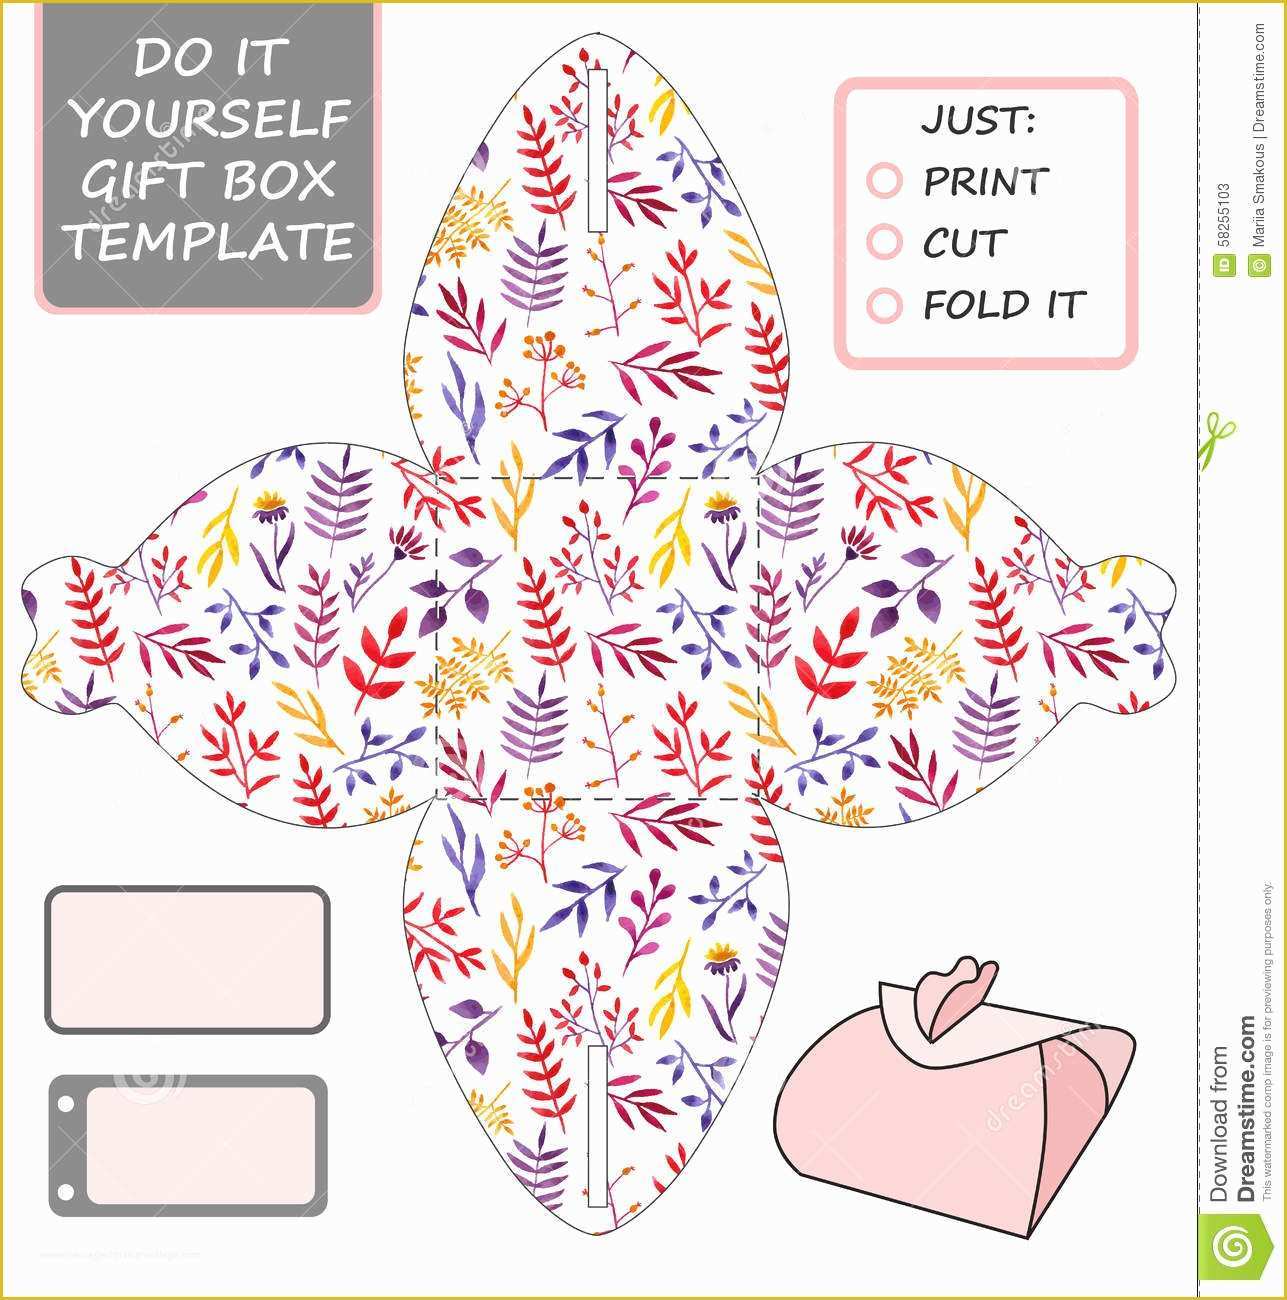 Free Die Cut Templates Of Favor Gift Box Die Cut Box Template Stock Illustration